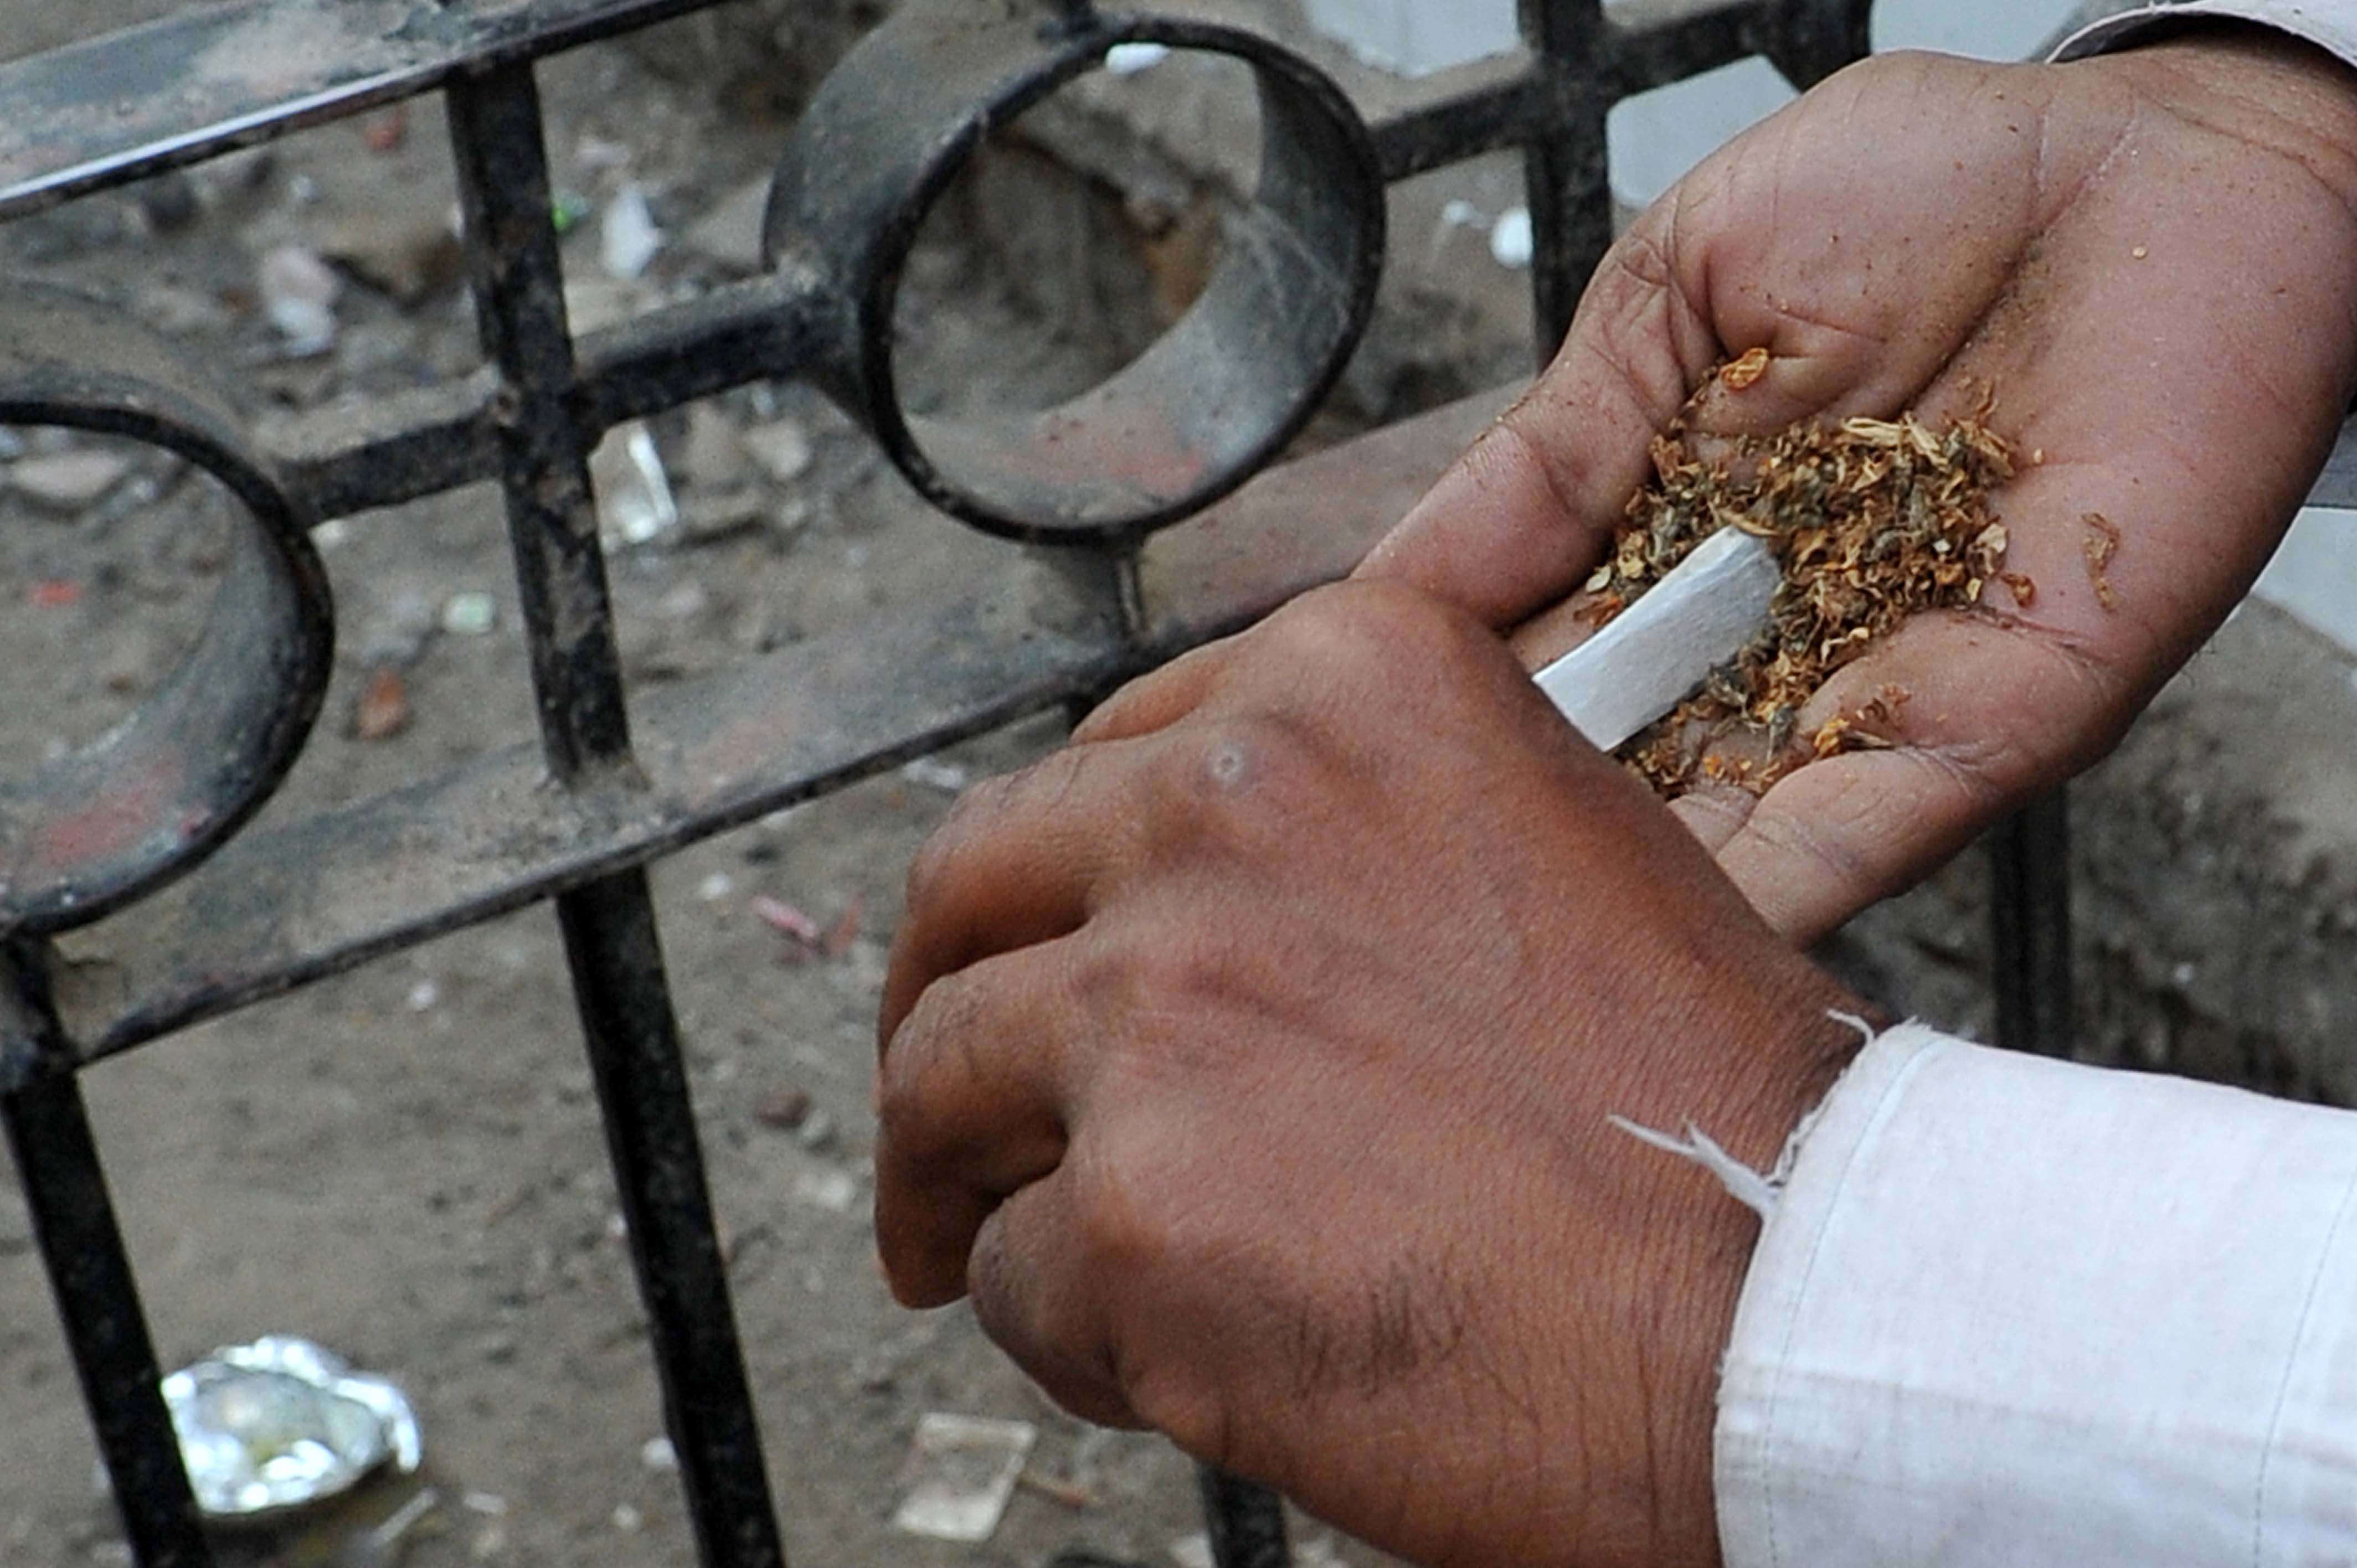 Openly smoking grass (Ganja) taking just behind the Andrews Ganj Police Station in Delhi as crime rate of Delhi is increasing a lot .--------------------------PIC BY ANINDYA CHATTOPADHYAY